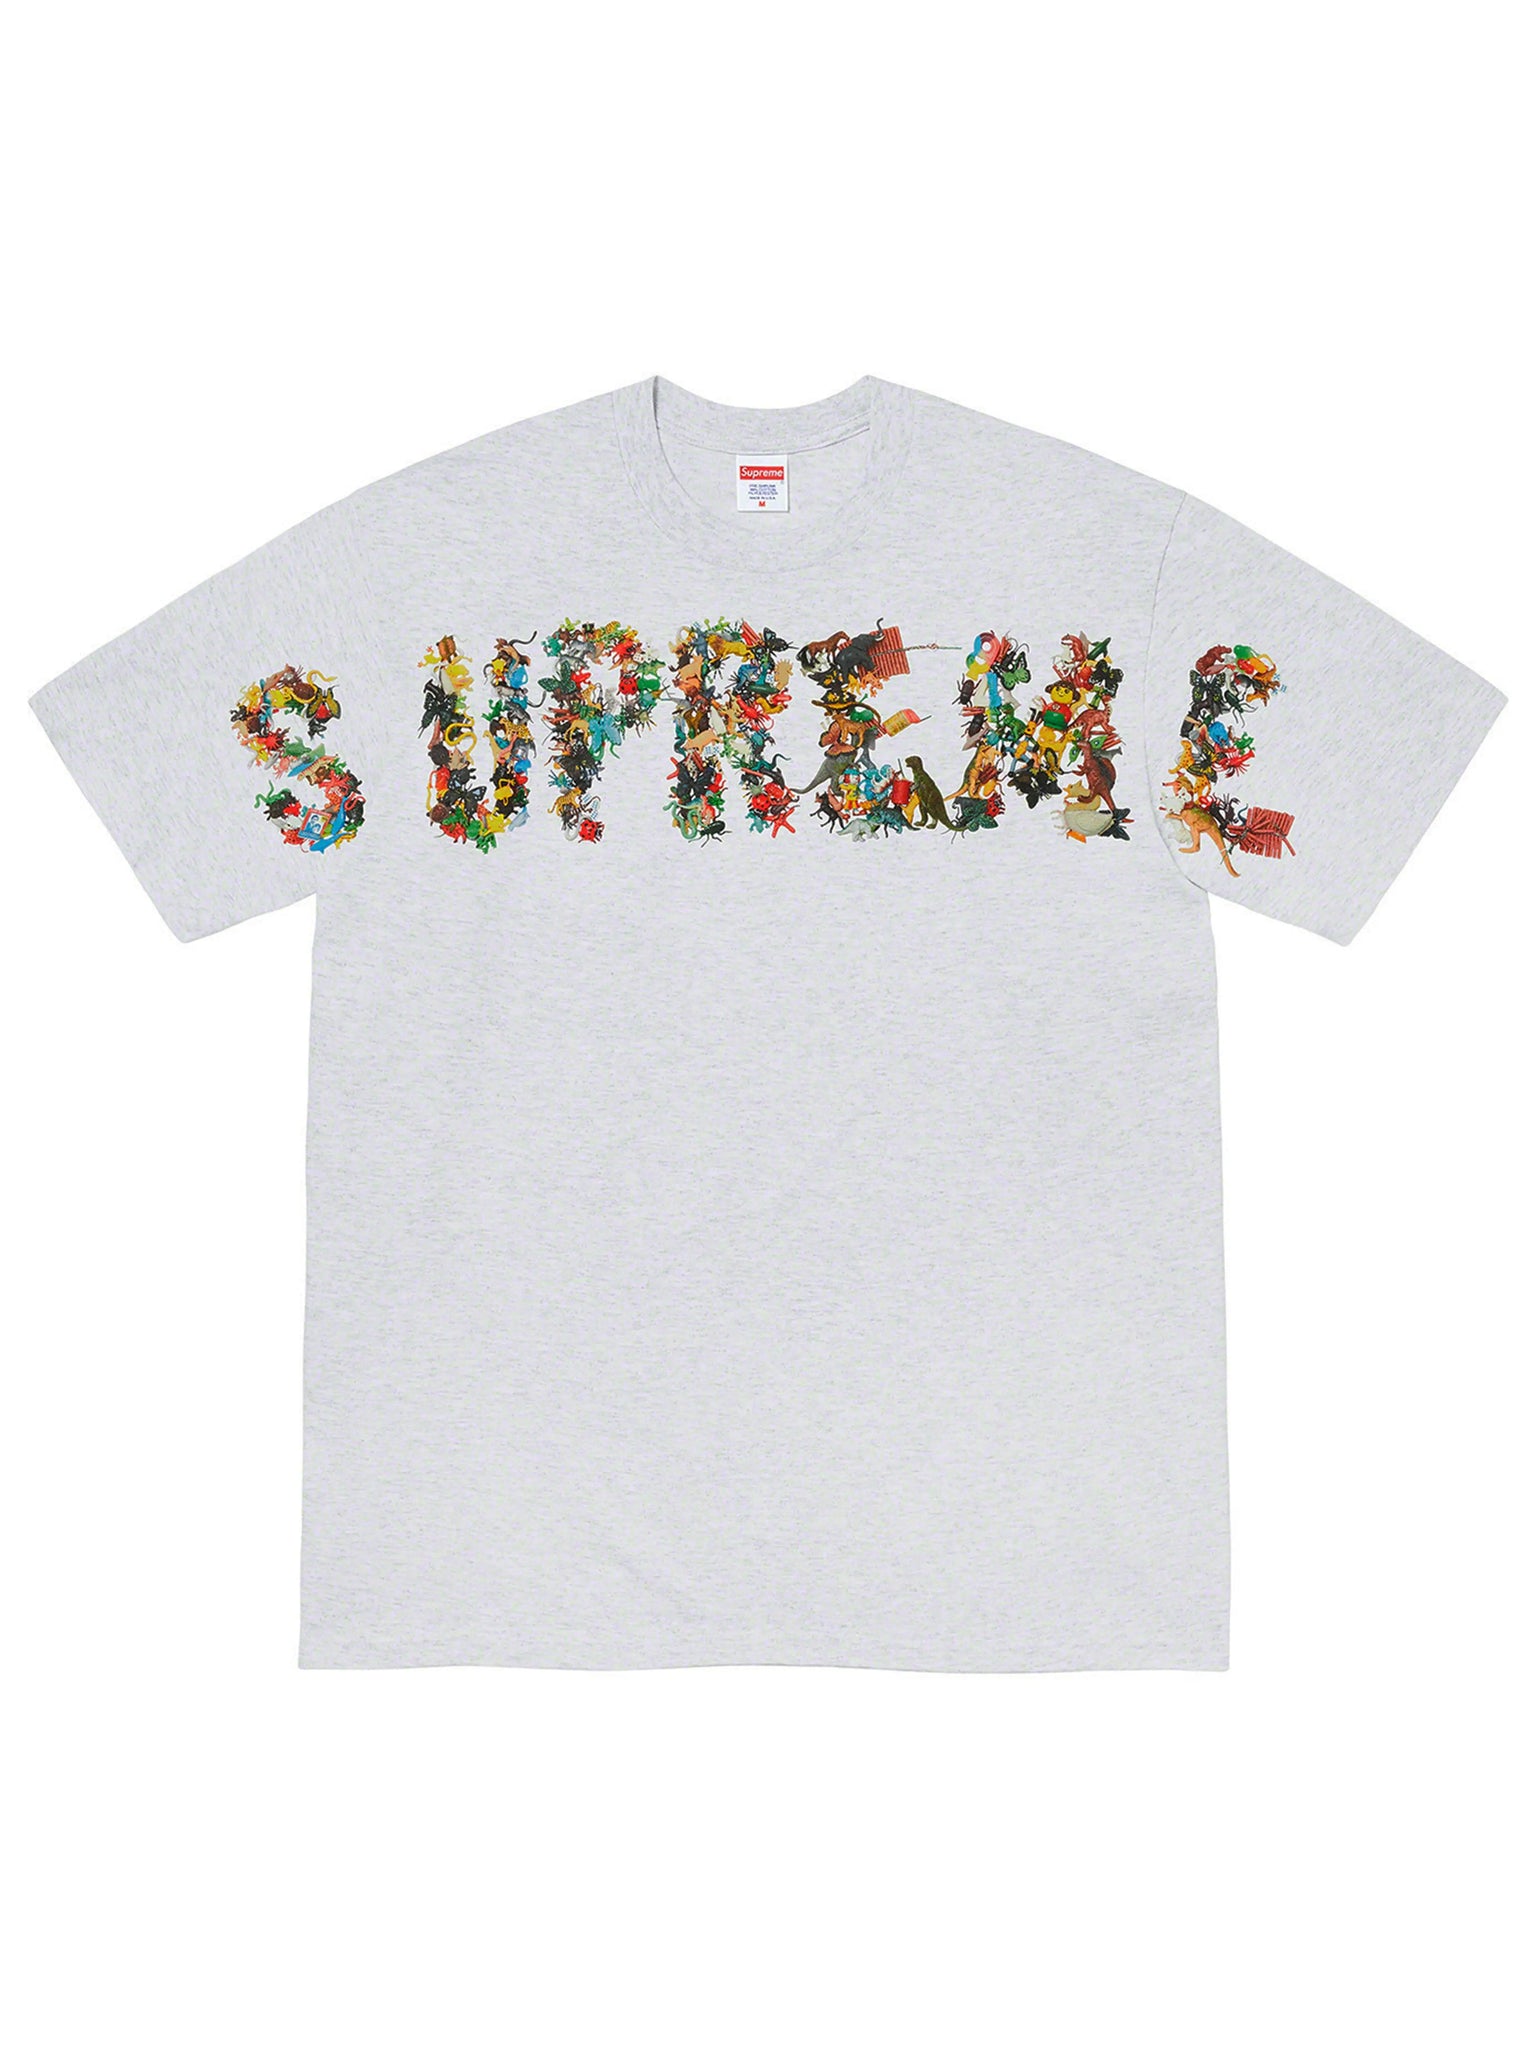 Supreme Toy Pile Tee Grey [SS21] Prior